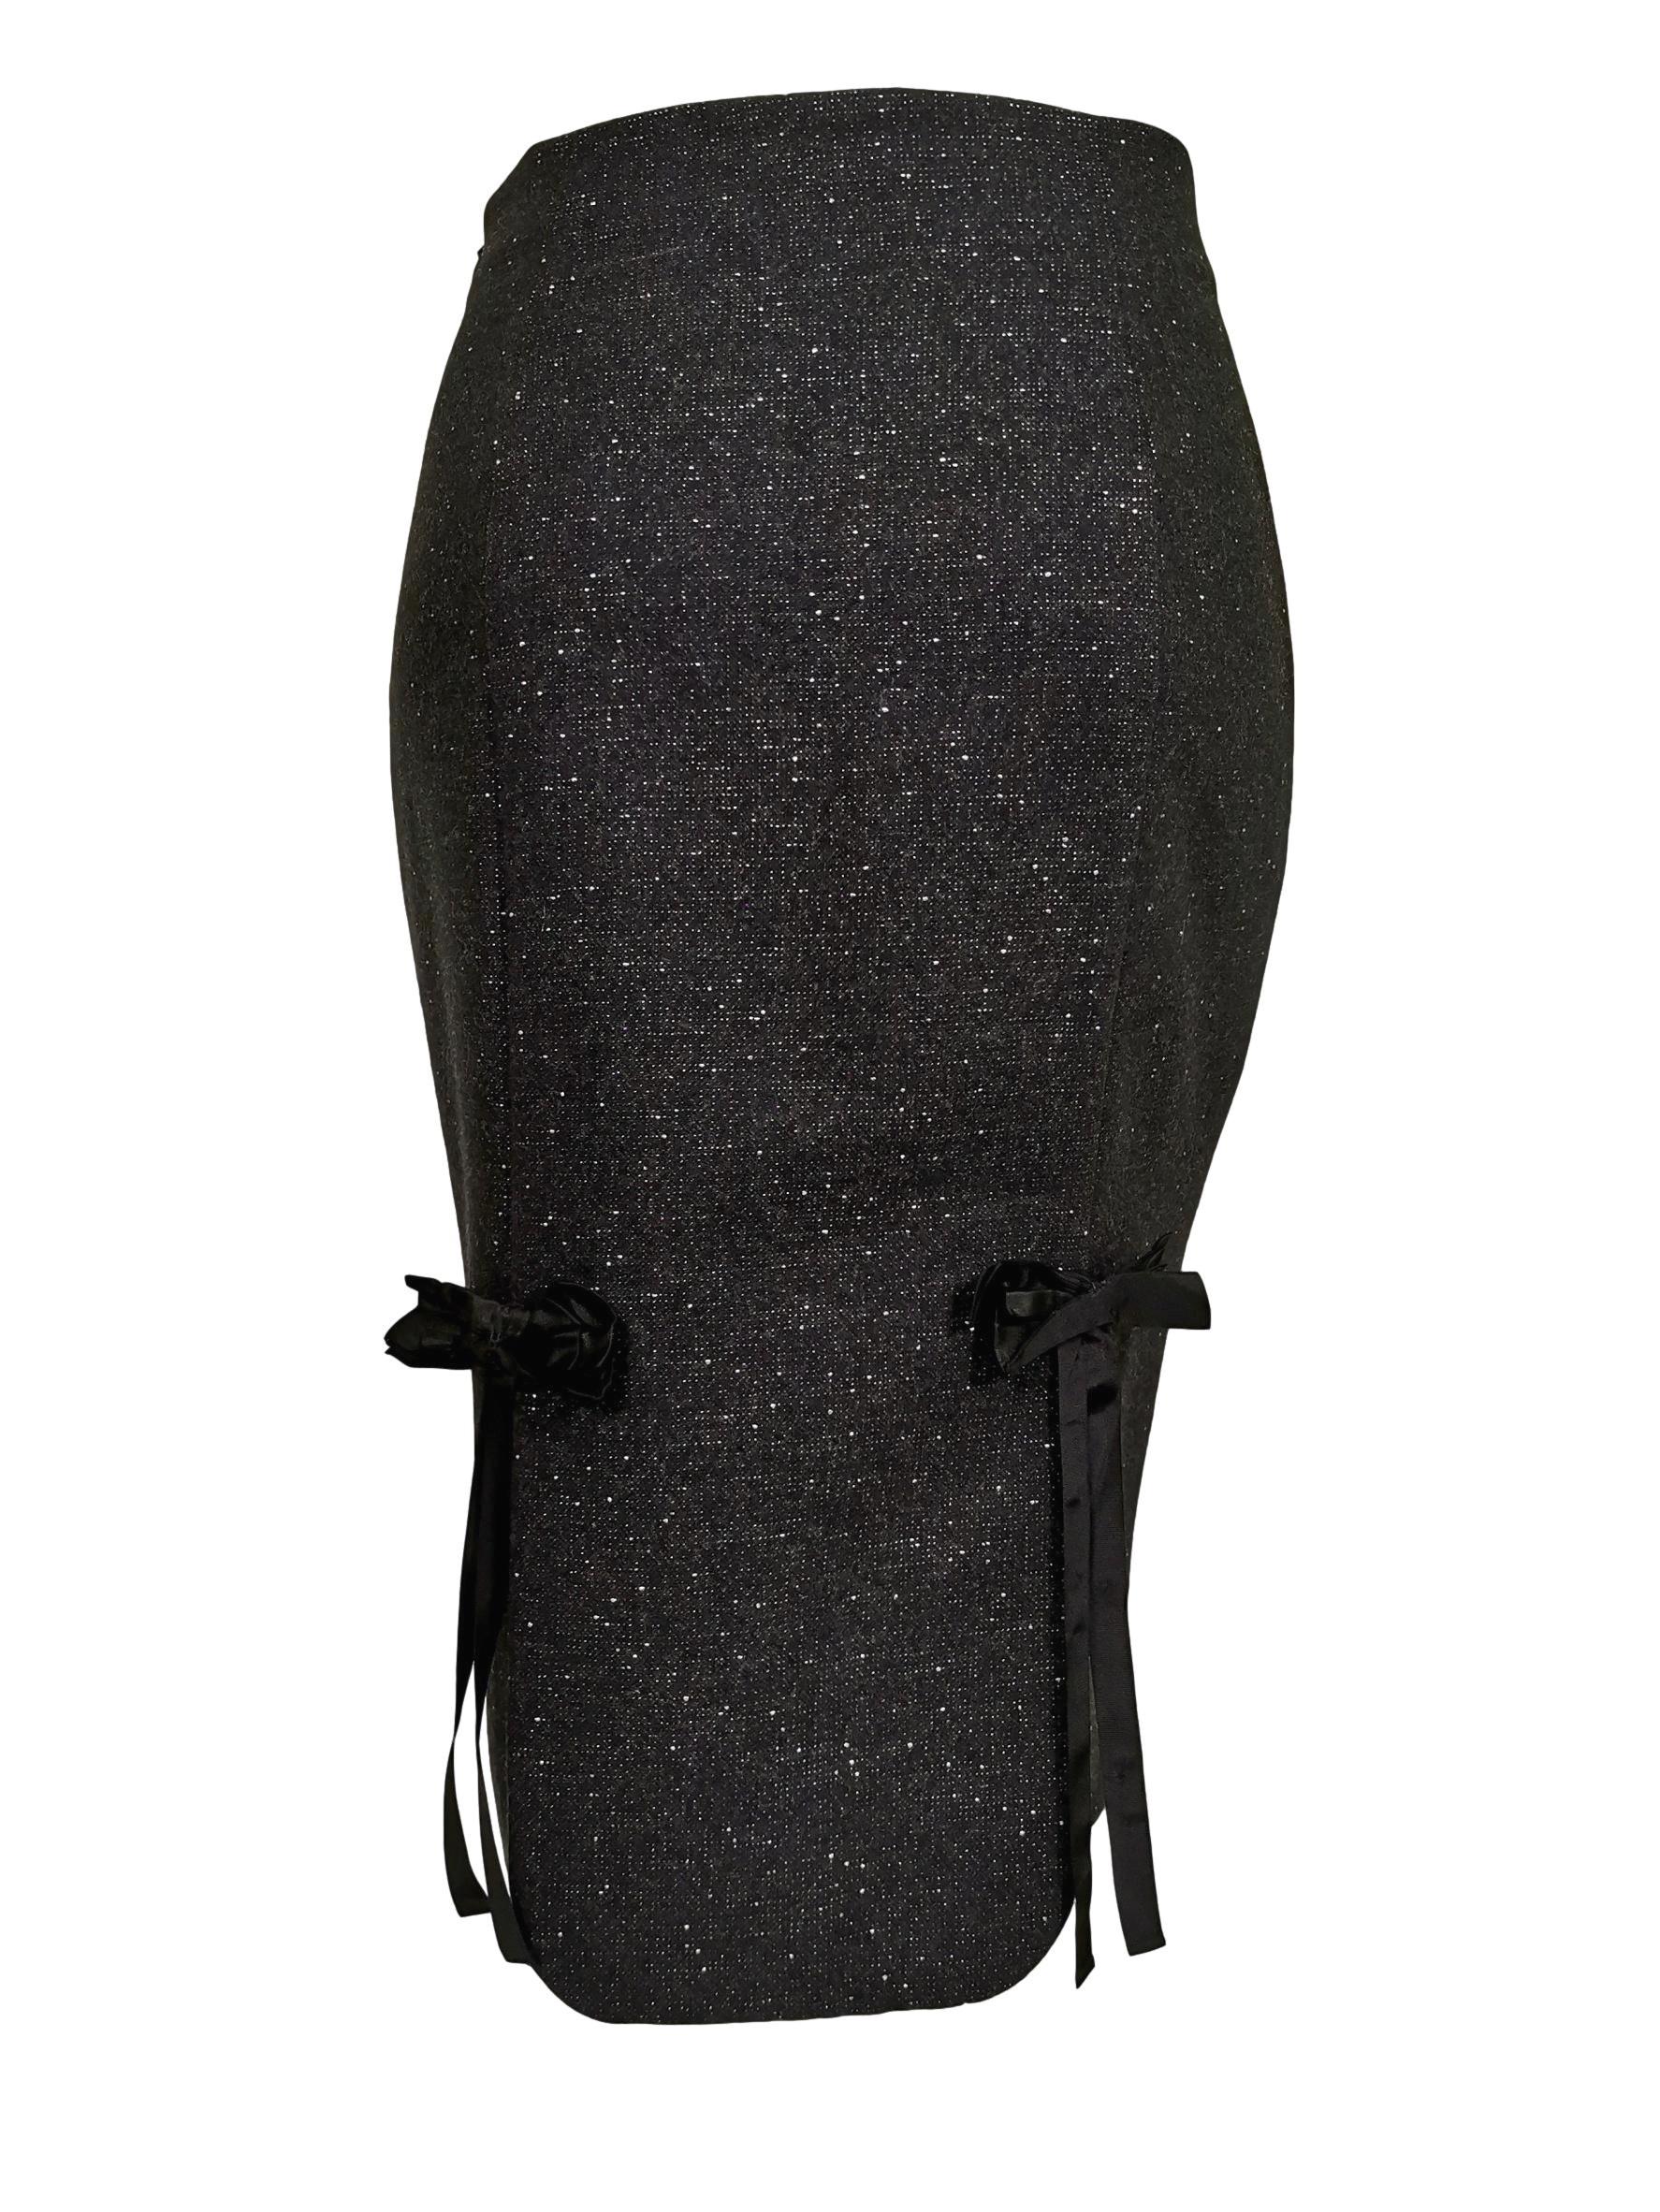 Black John Galliano Wool/Cashmere, Lace and Ribbon Skirt Suit A/W 2011 For Sale